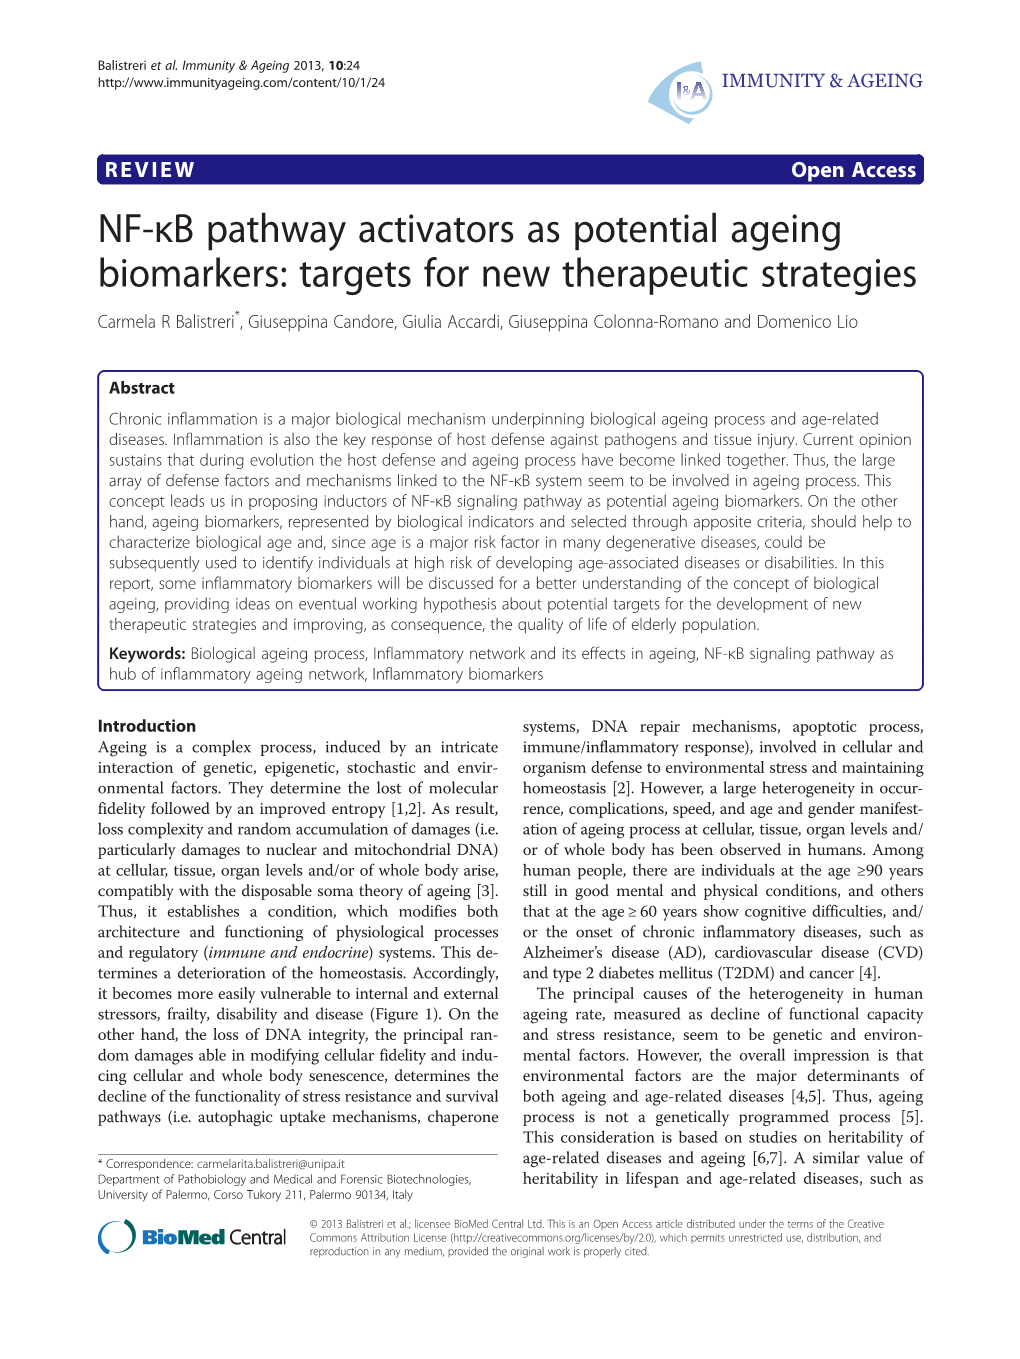 NF-Κb Pathway Activators As Potential Ageing